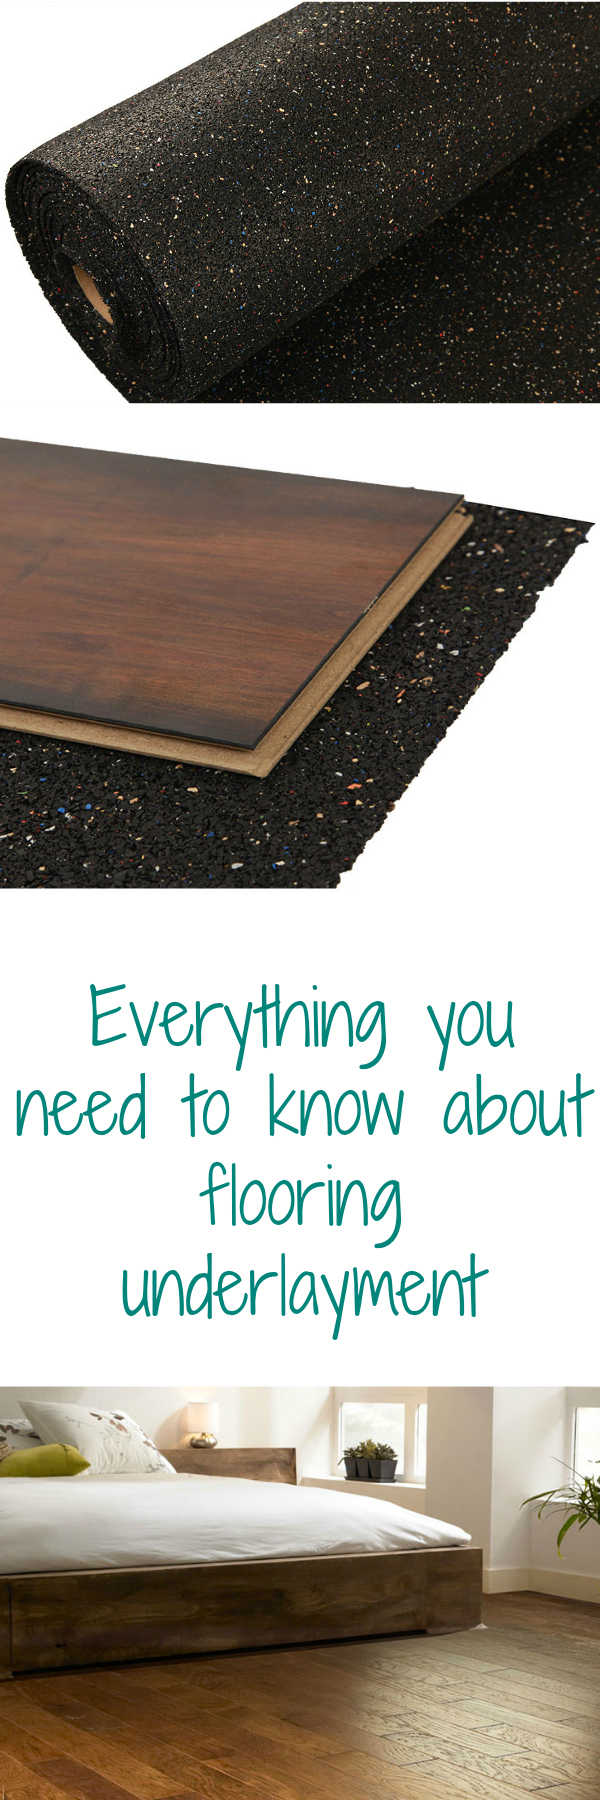 Everything you need to know about flooring underlayment Your questions answered!